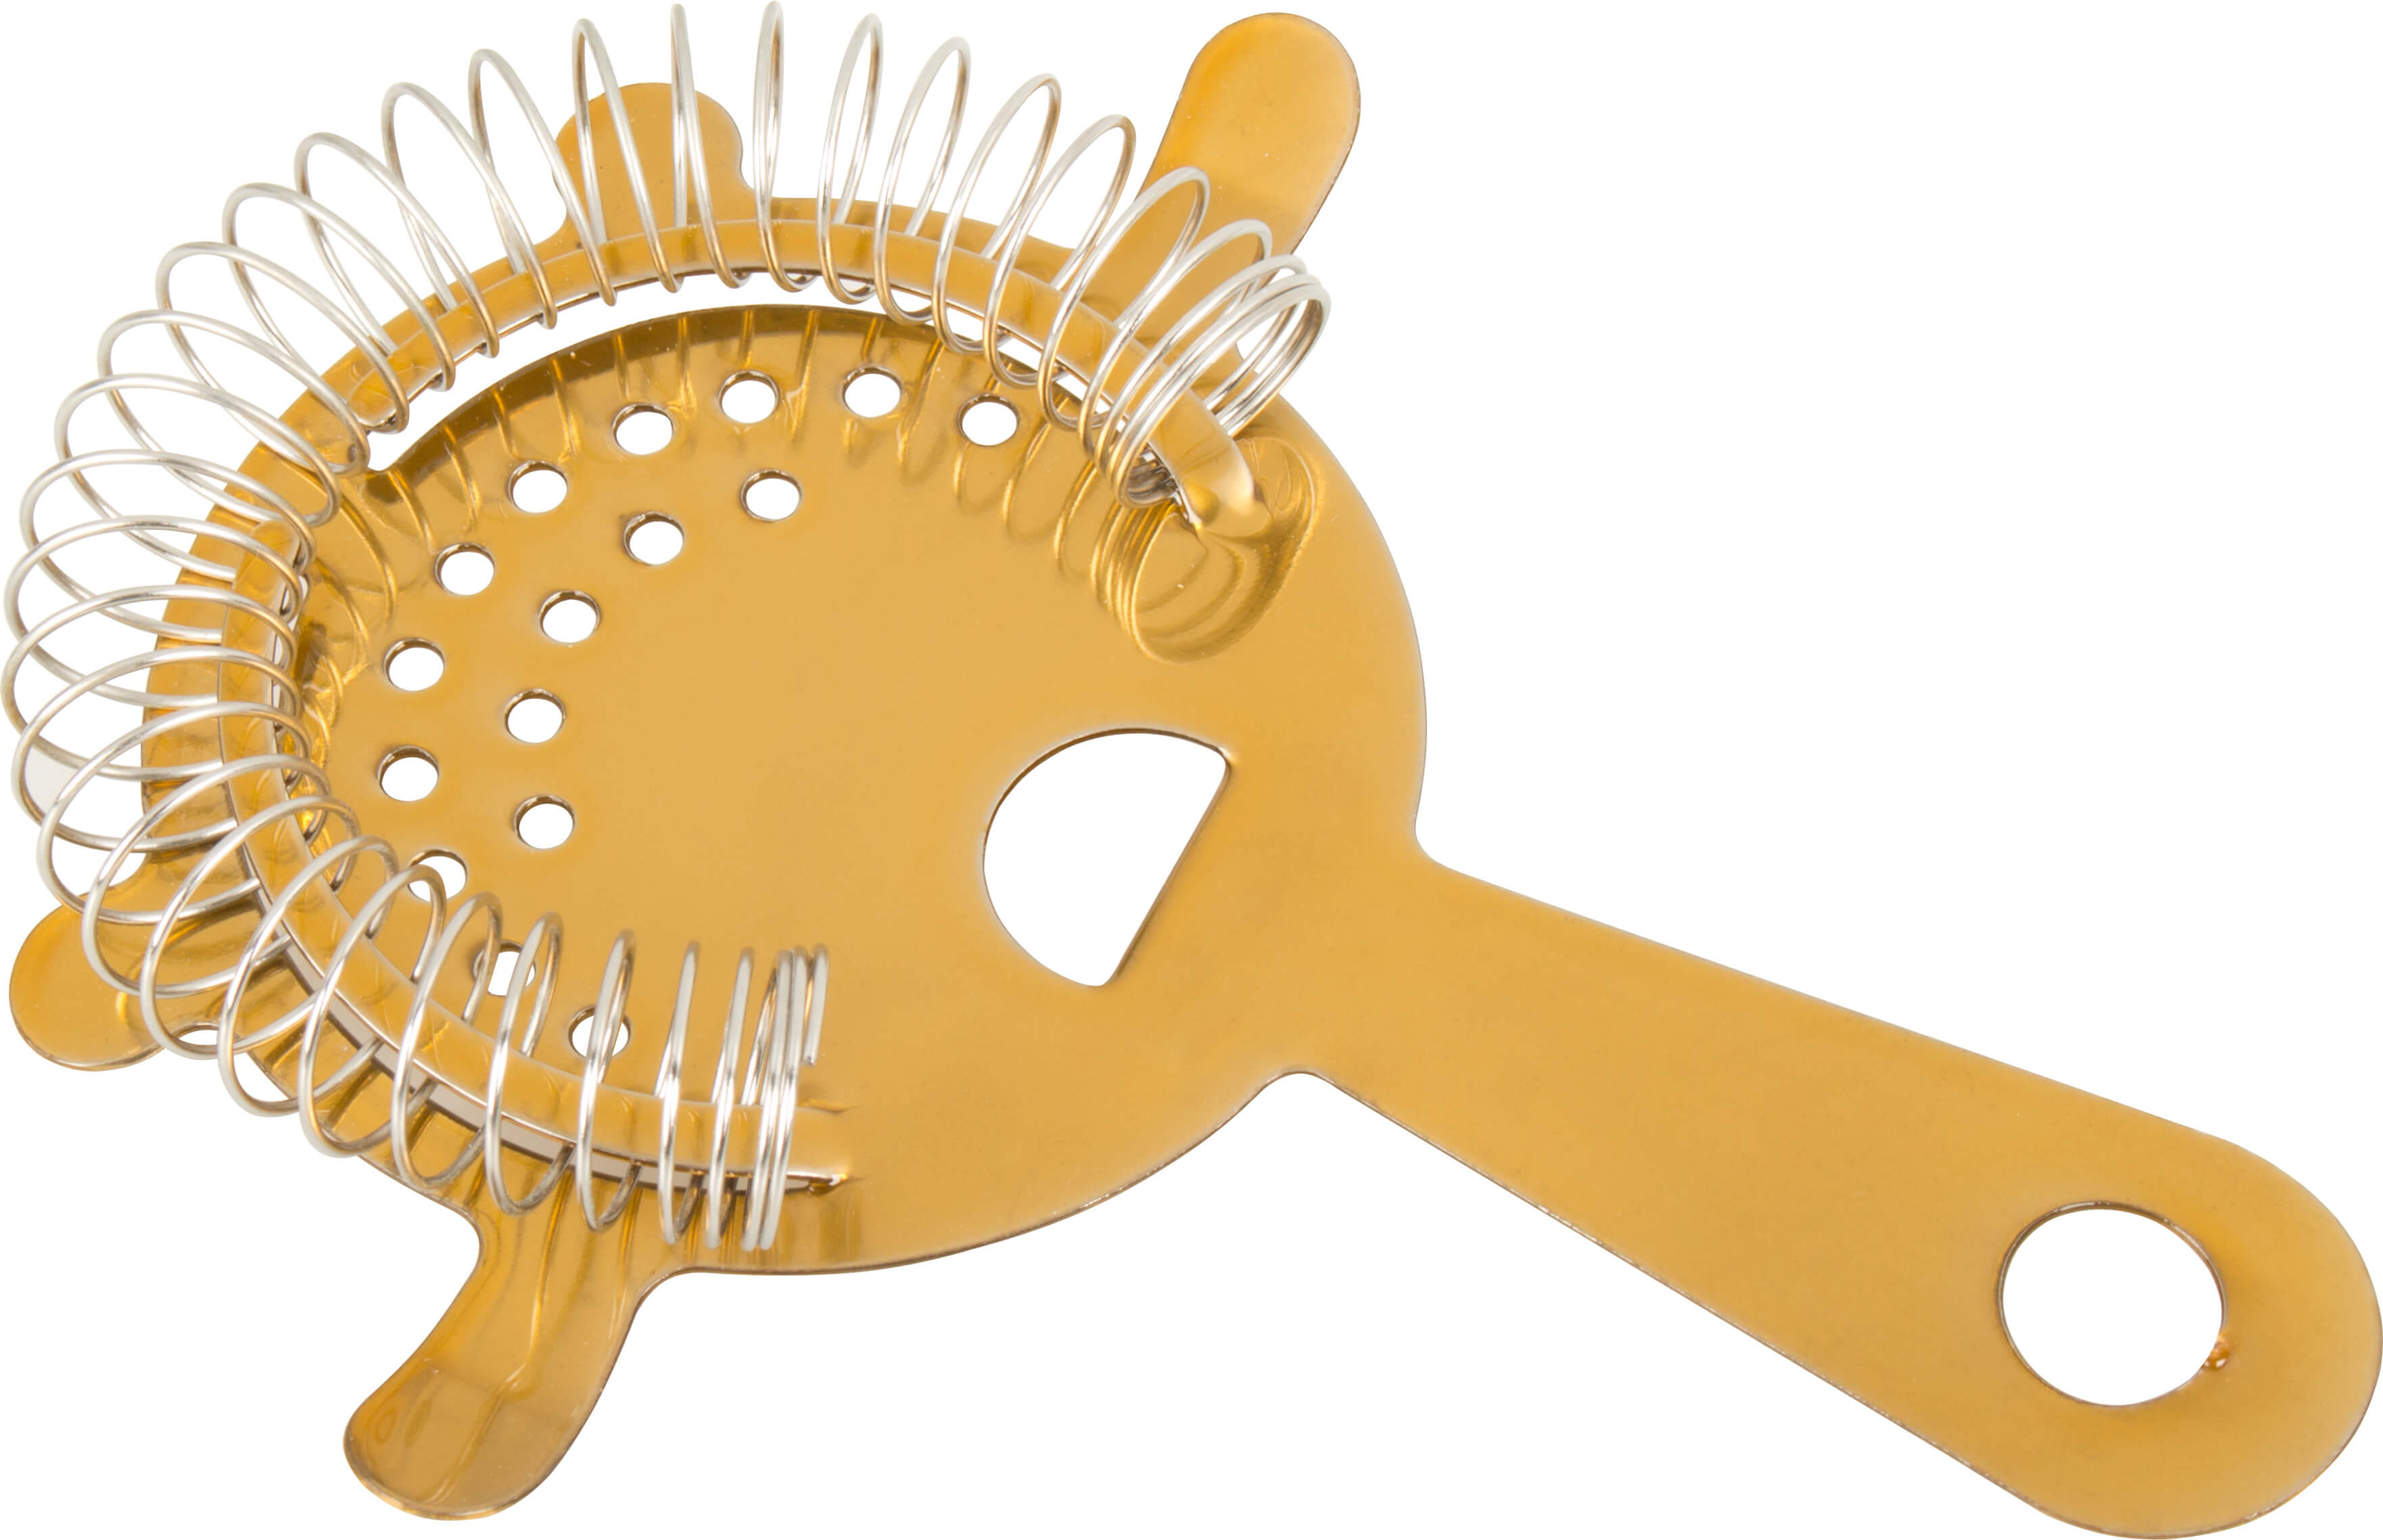 Strainer, stainless steel - gold-colored (8cm)